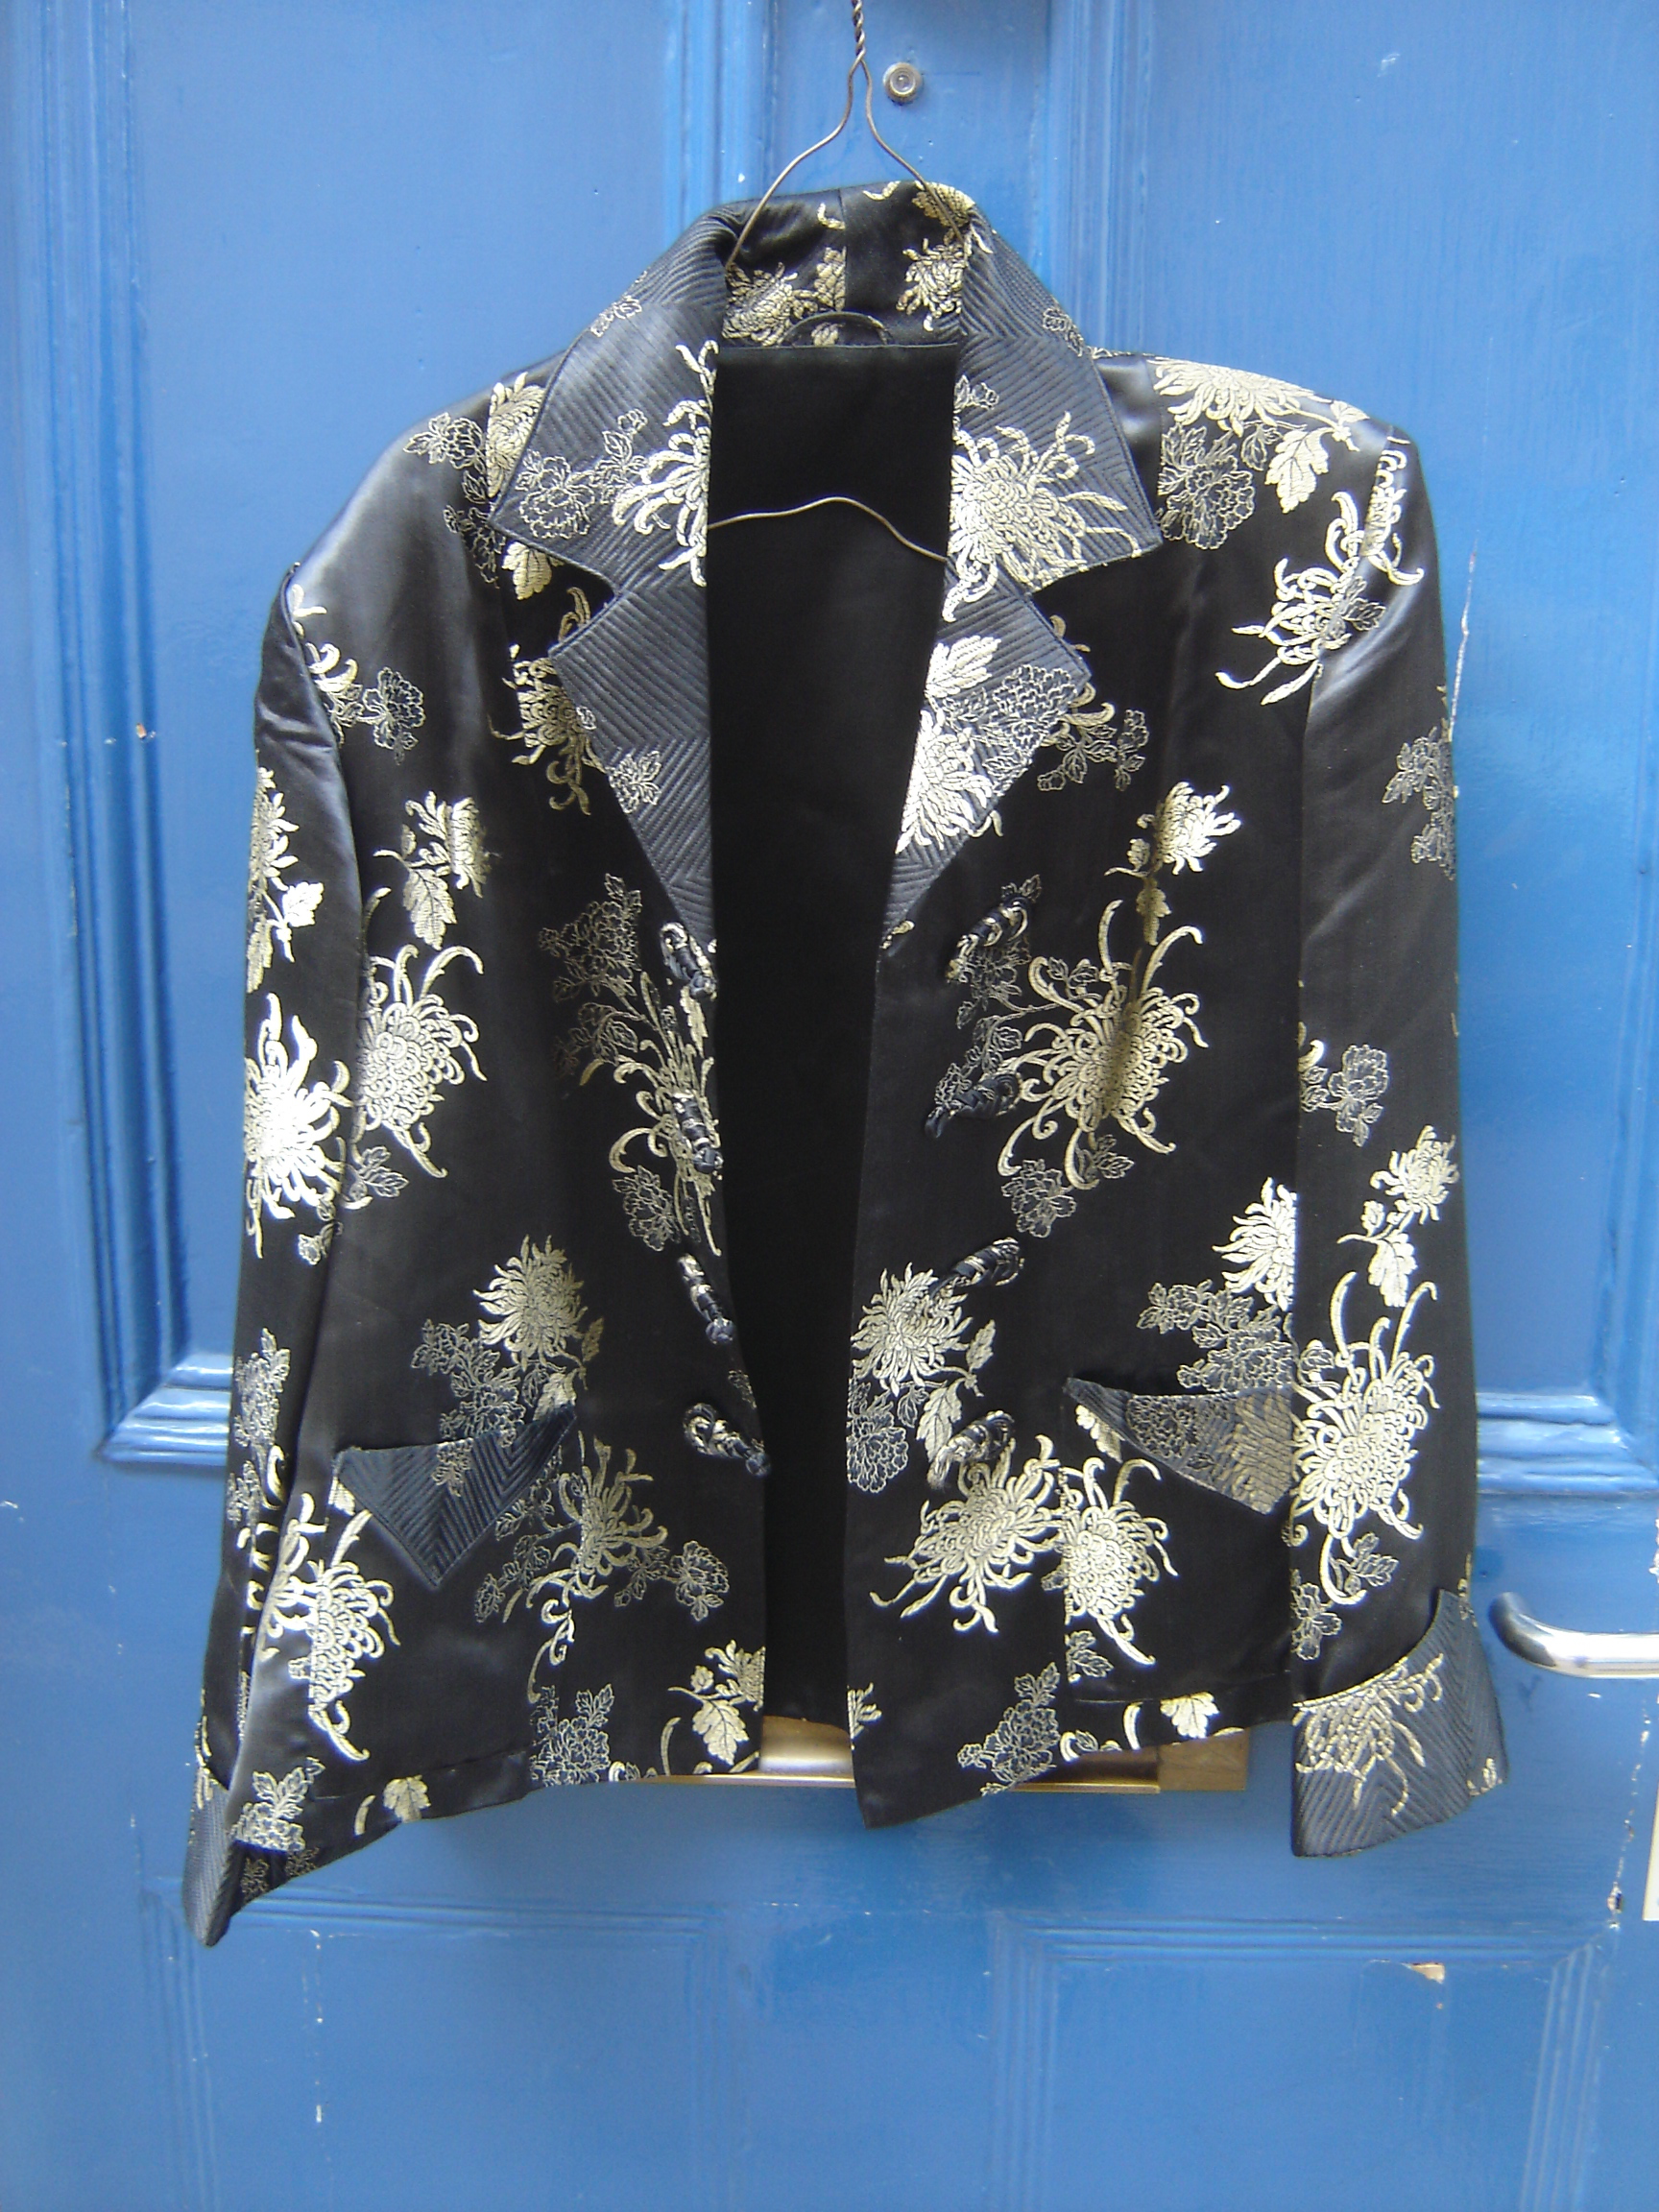 Black and gold silk top, from Unicorn, 5 Ship Street, Oxford